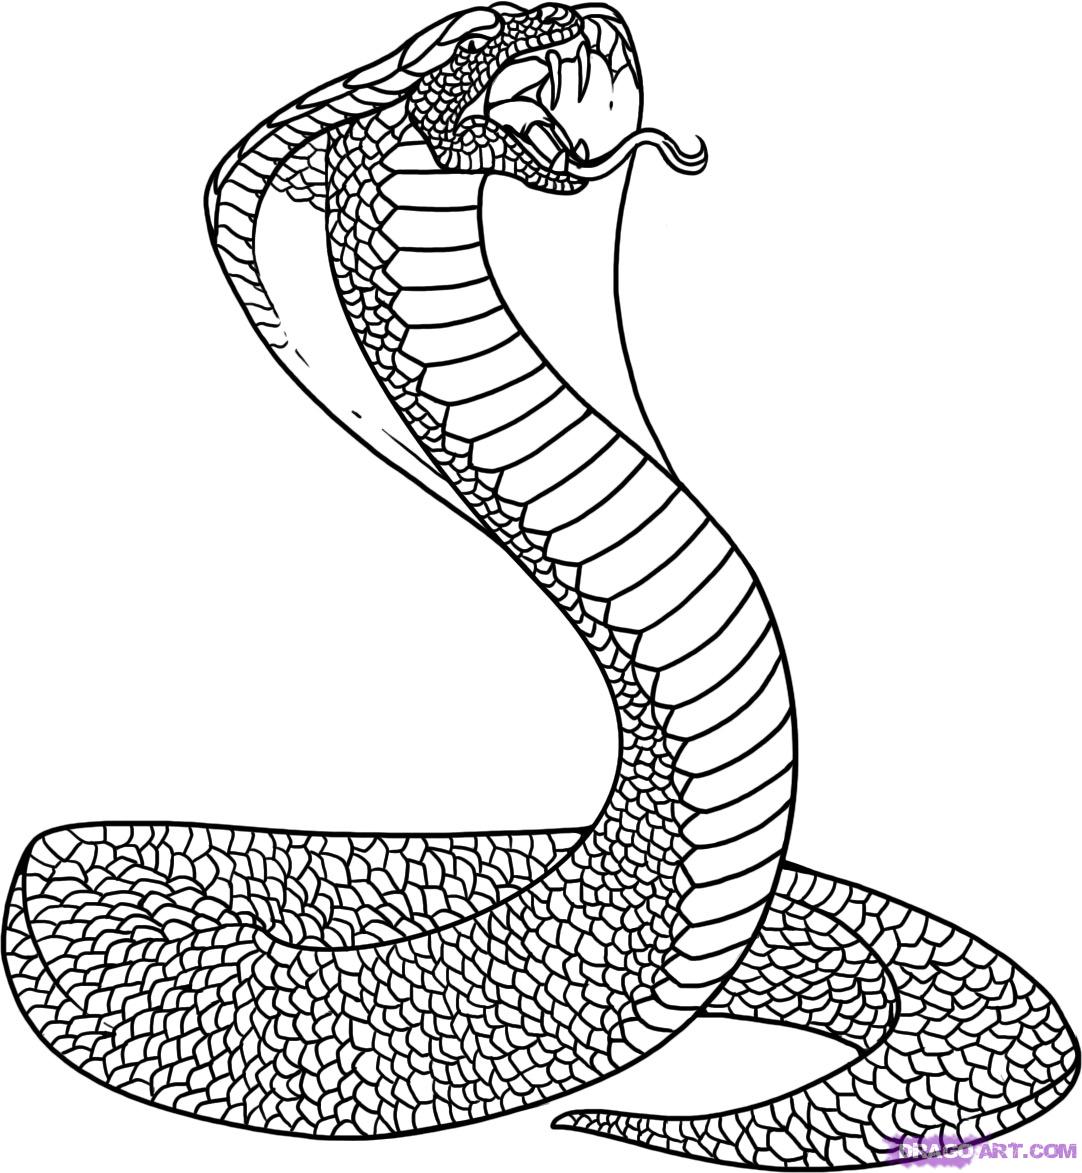 how-to-draw-a-snake-king-cobra-step-7_1_000000000723_5